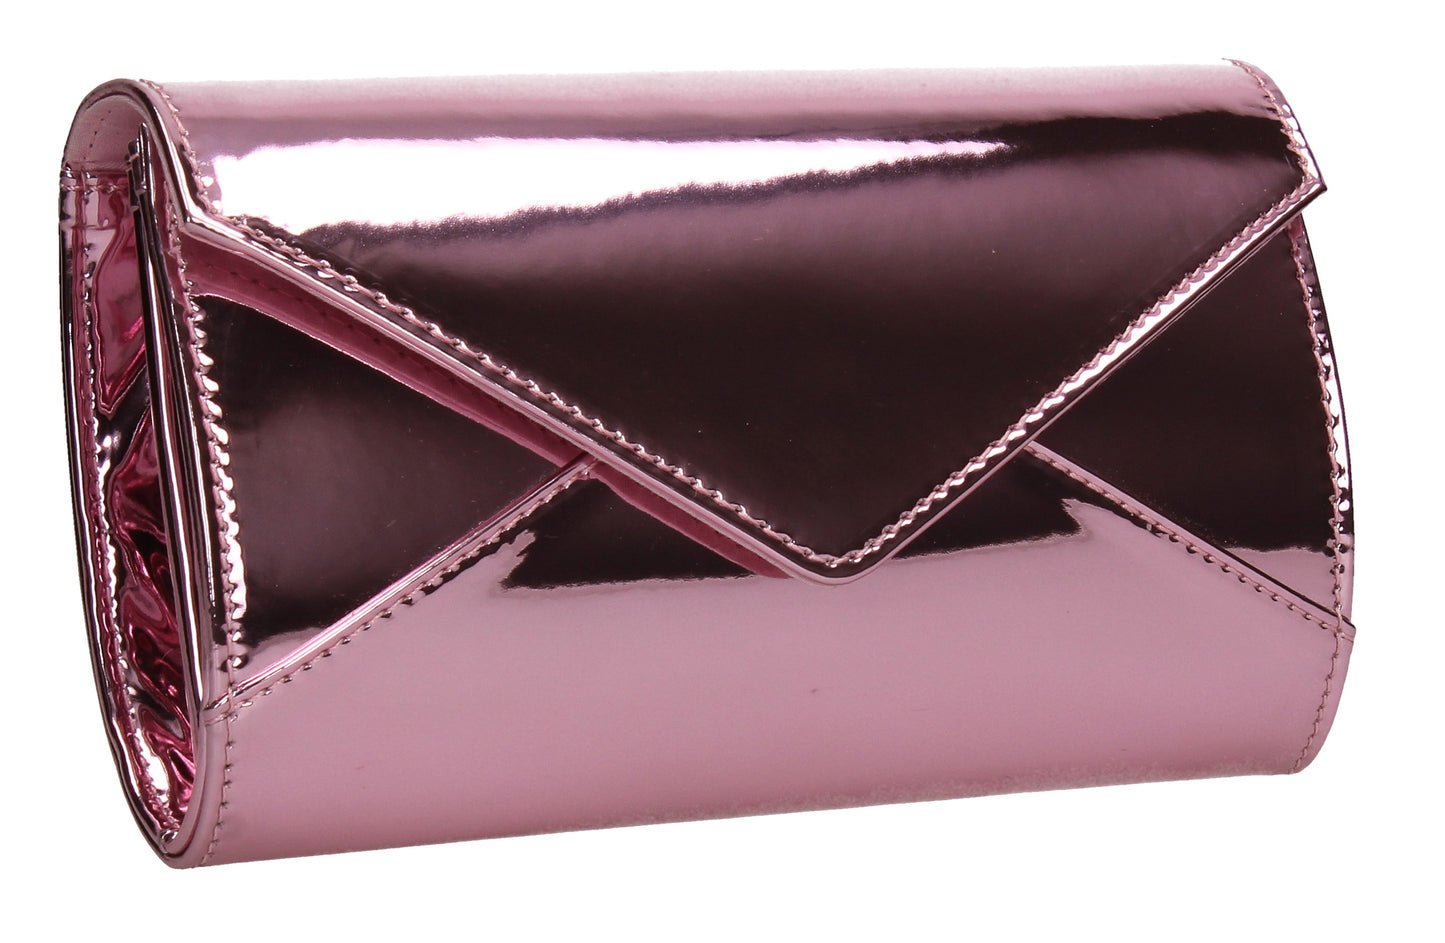 SWANKYSWANS Emely Patent Clutch Bag Pink Cute Cheap Clutch Bag For Weddings School and Work